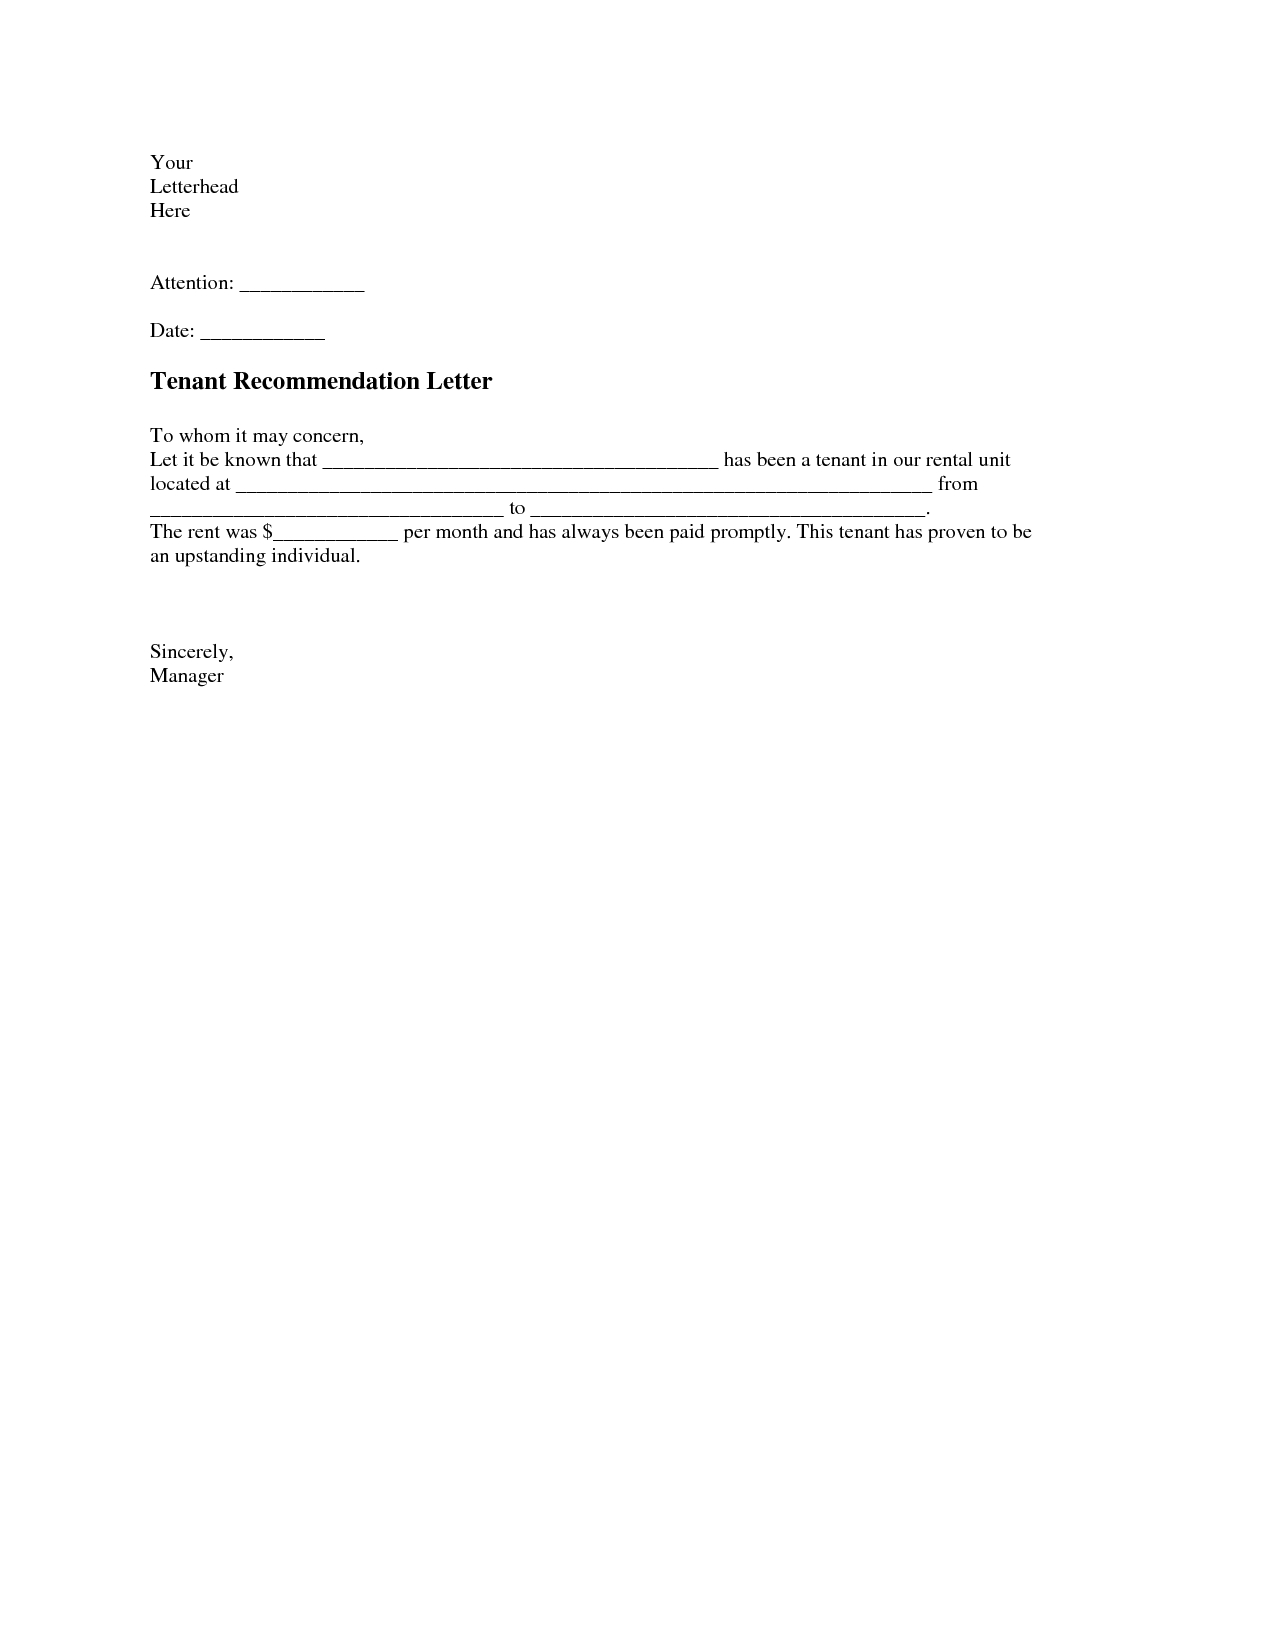 Tenant Recommendation Letter A Tenant Recommendation with size 1275 X 1650